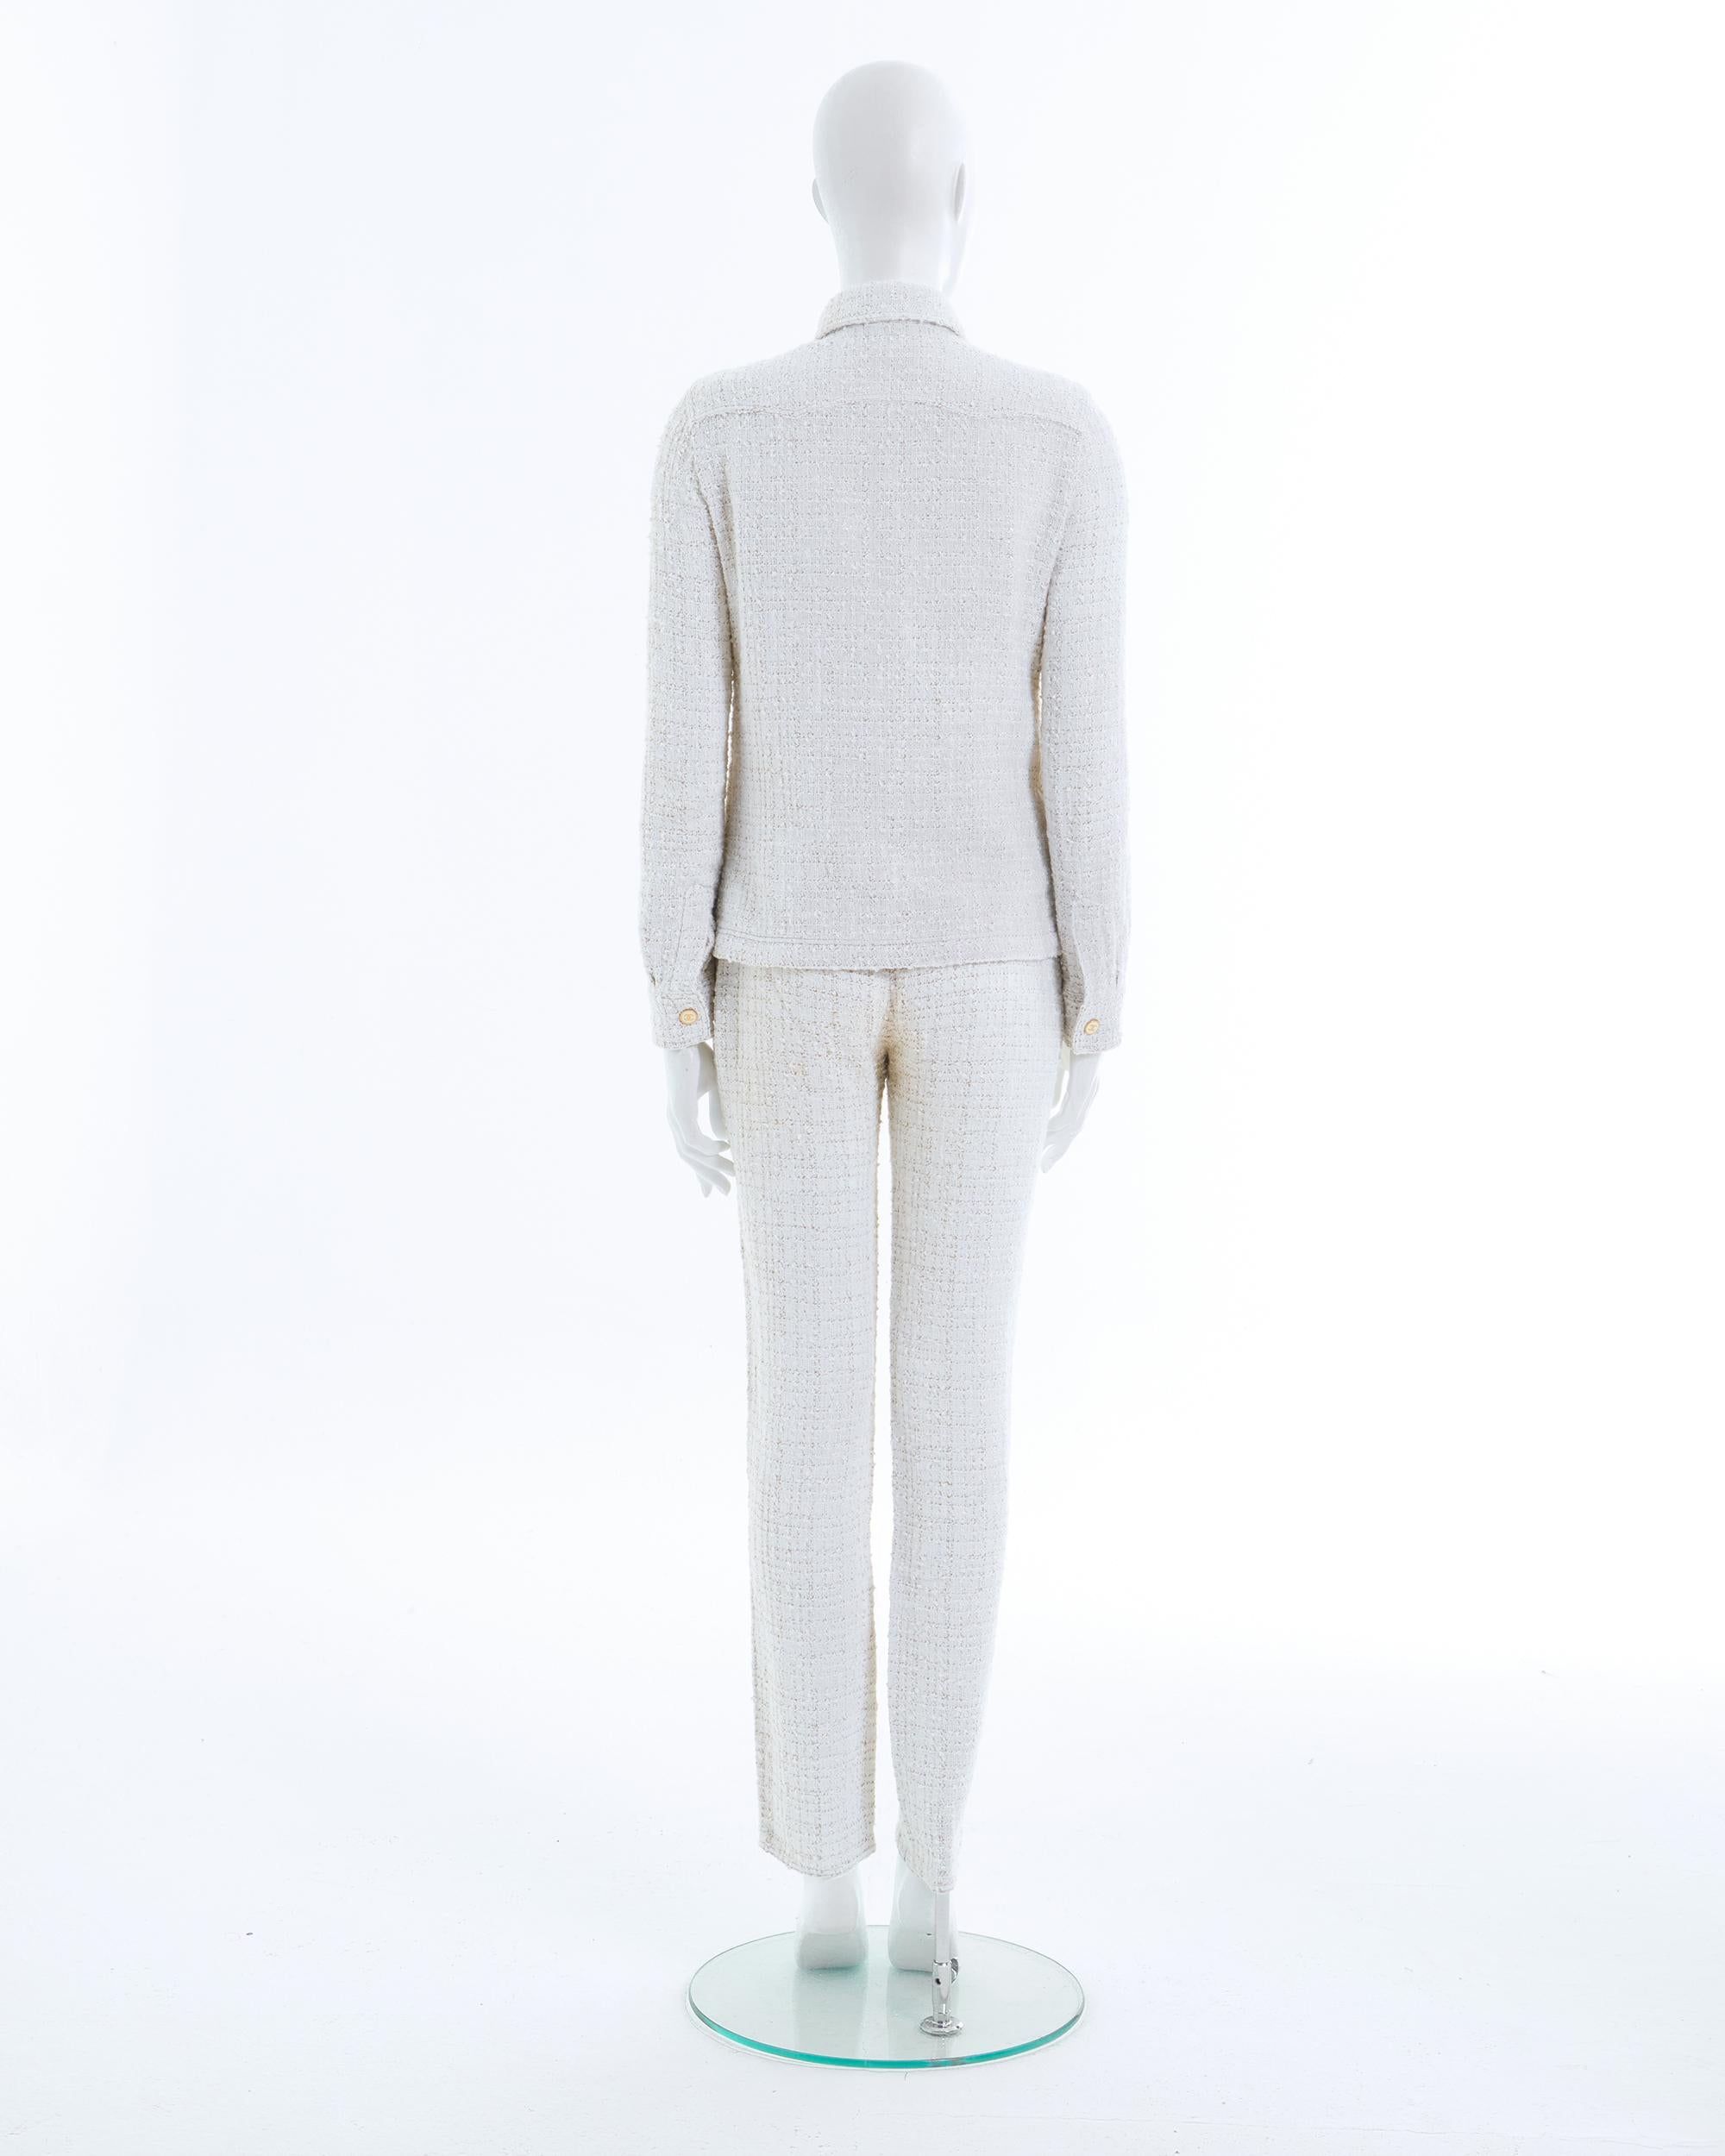 Chanel by Karl Lagerfeld S/S 2001 Off-White bouclé shirt jacket and pants set  For Sale 1